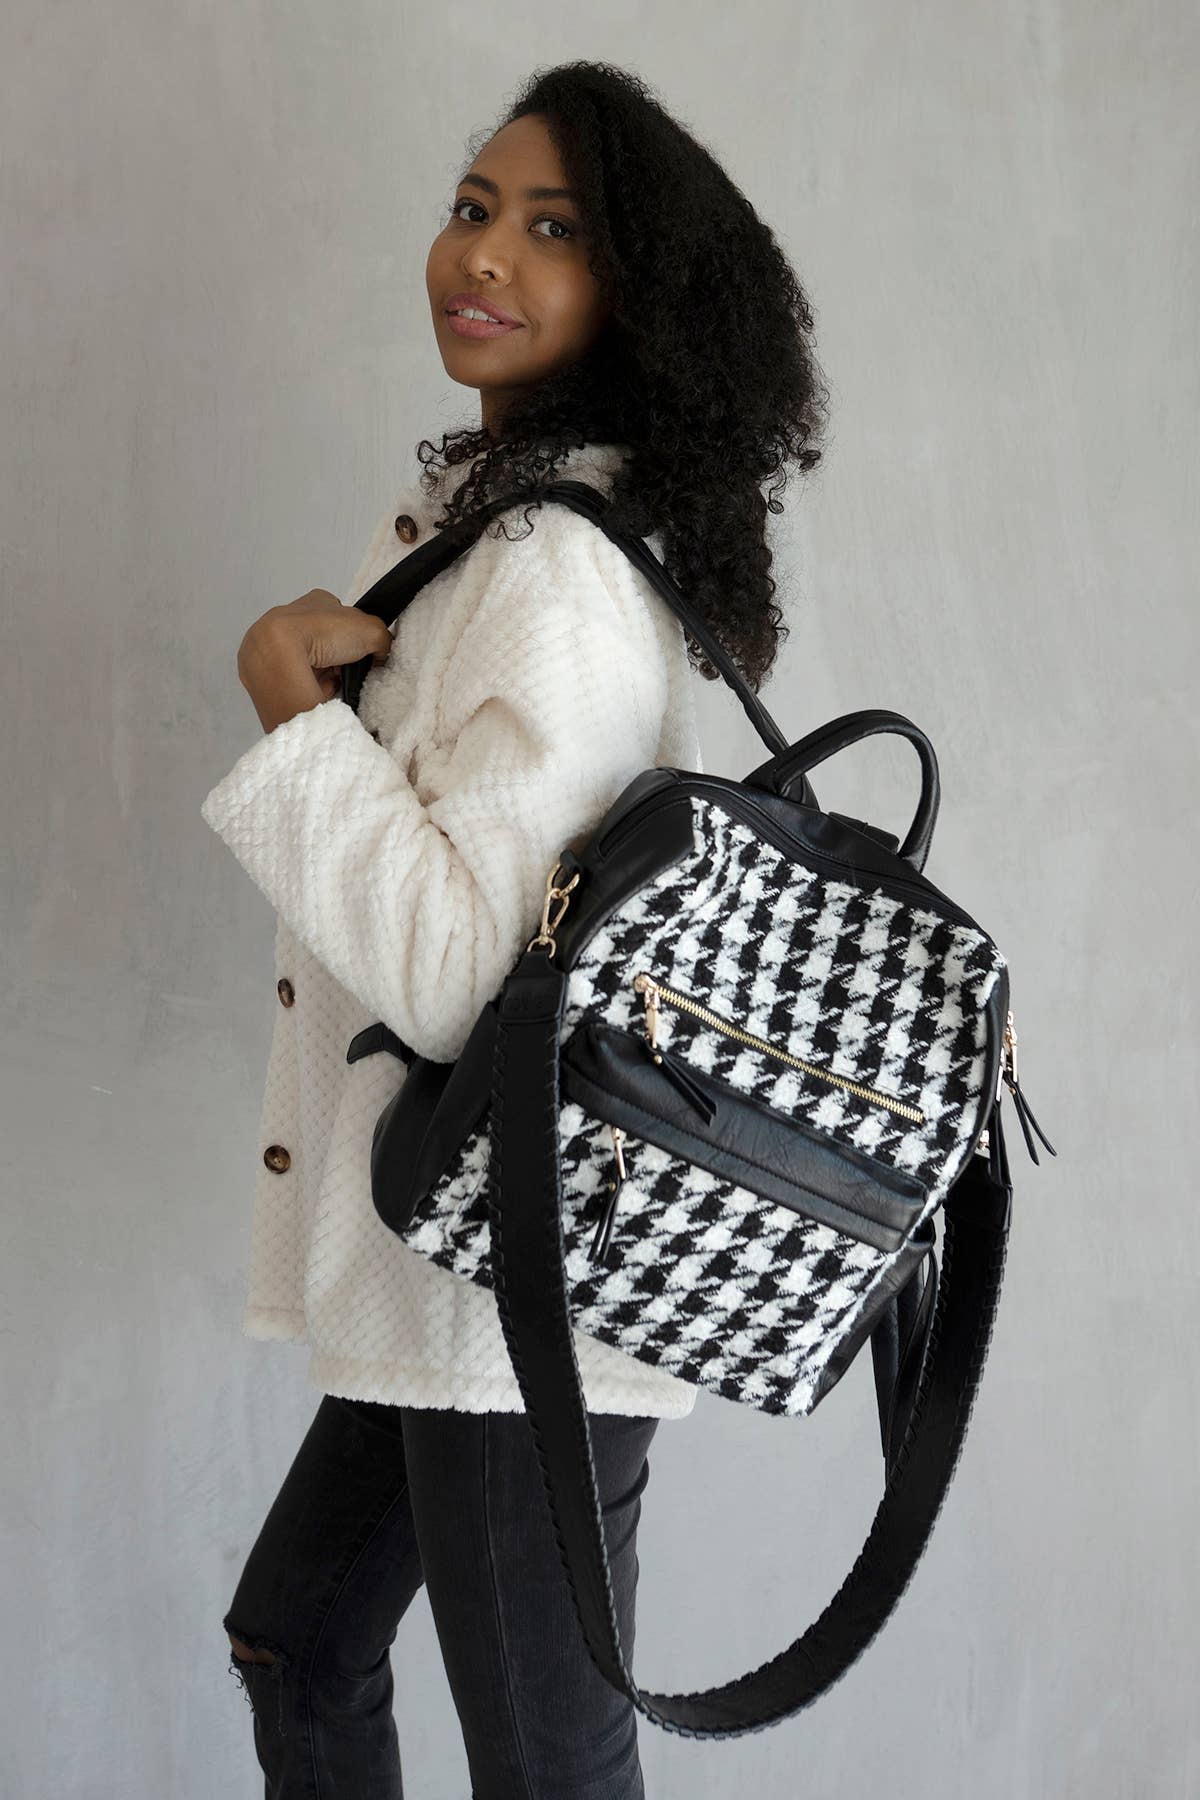 Black and White Houndstooth Backpack w/ Removable Strap